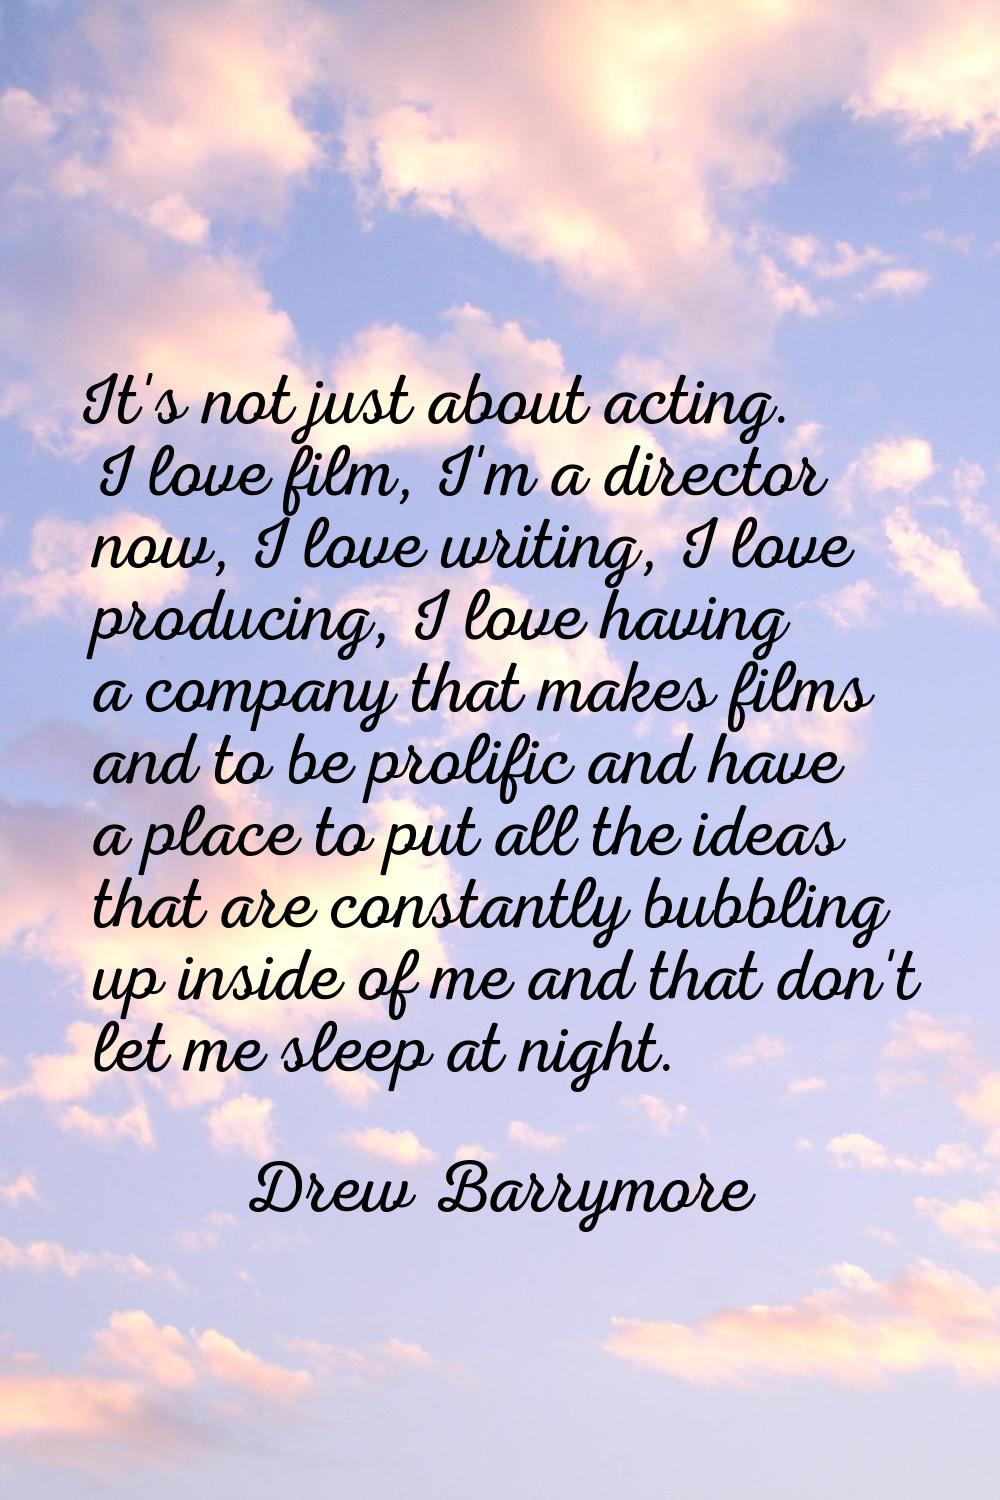 It's not just about acting. I love film, I'm a director now, I love writing, I love producing, I lo